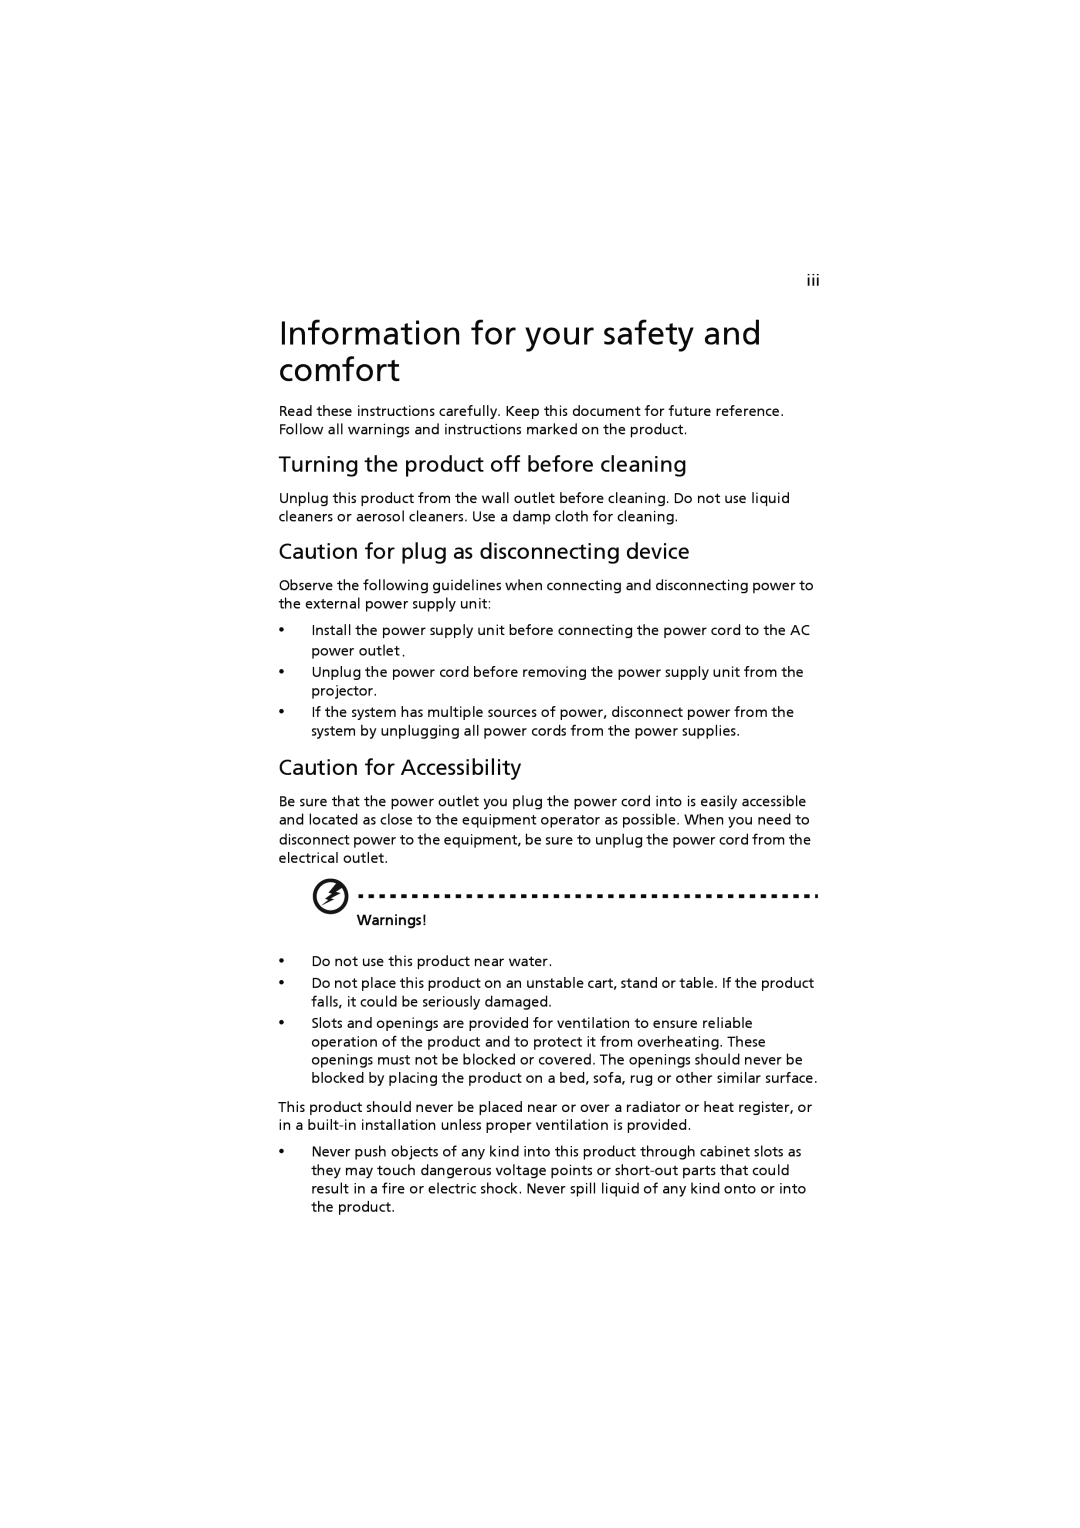 Acer P7200i Information for your safety and comfort, Turning the product off before cleaning, Caution for Accessibility 